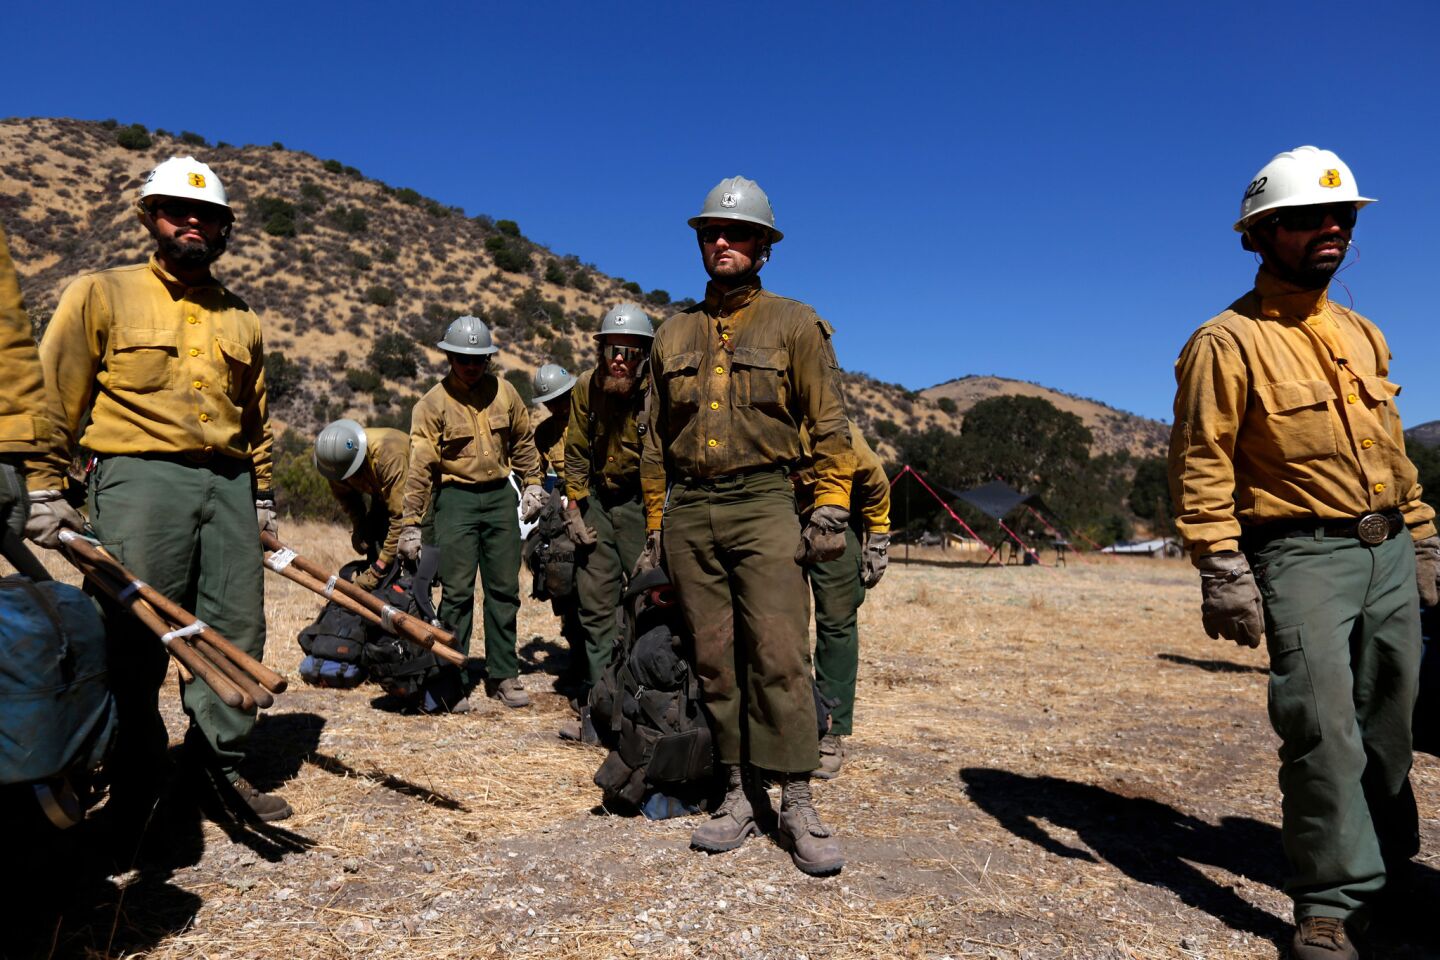 Members of the U.S. Forest Service Smith River Hotshot Crew wait to be air-lifted by helicopter to battle the Soberanes fire burning in Garrapata State Park in the Los Padres National Forest.